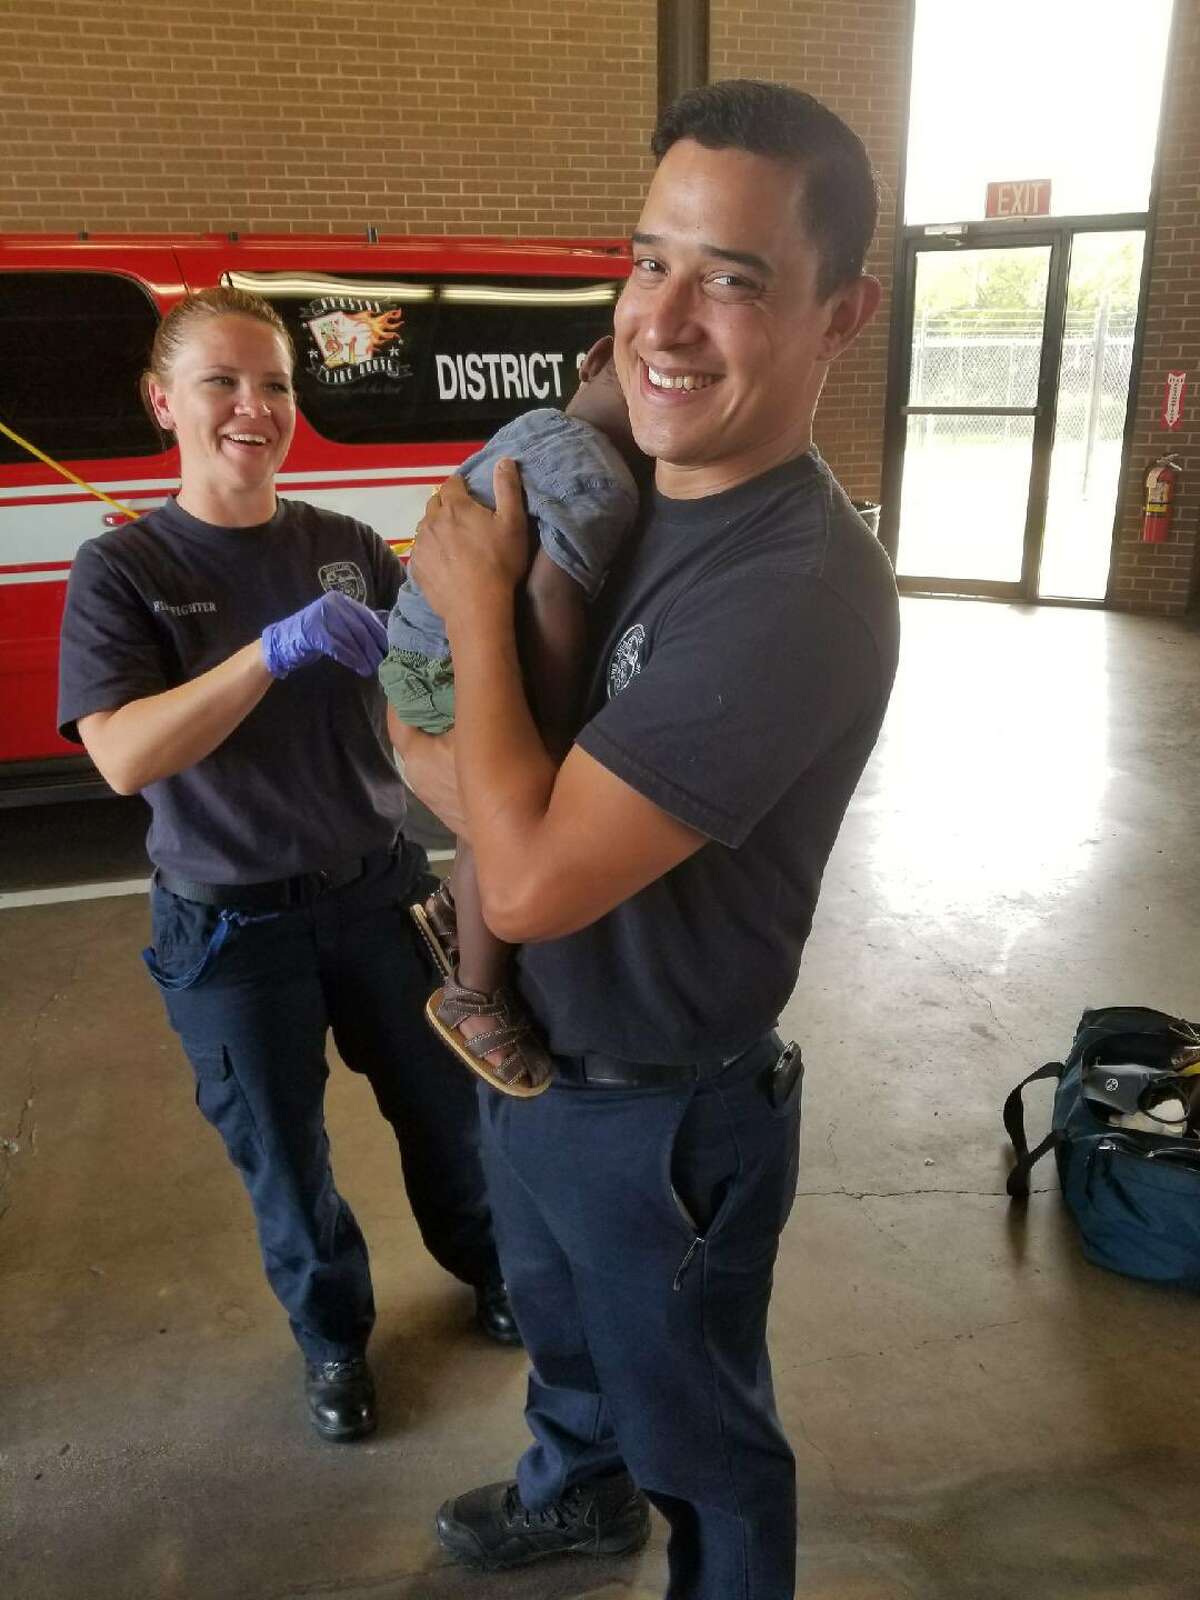 Houston firefighters care for a 1-year-old boy left at Station 21 on Friday. The child, who alerted the firefighters with his crying, appeared in good health.